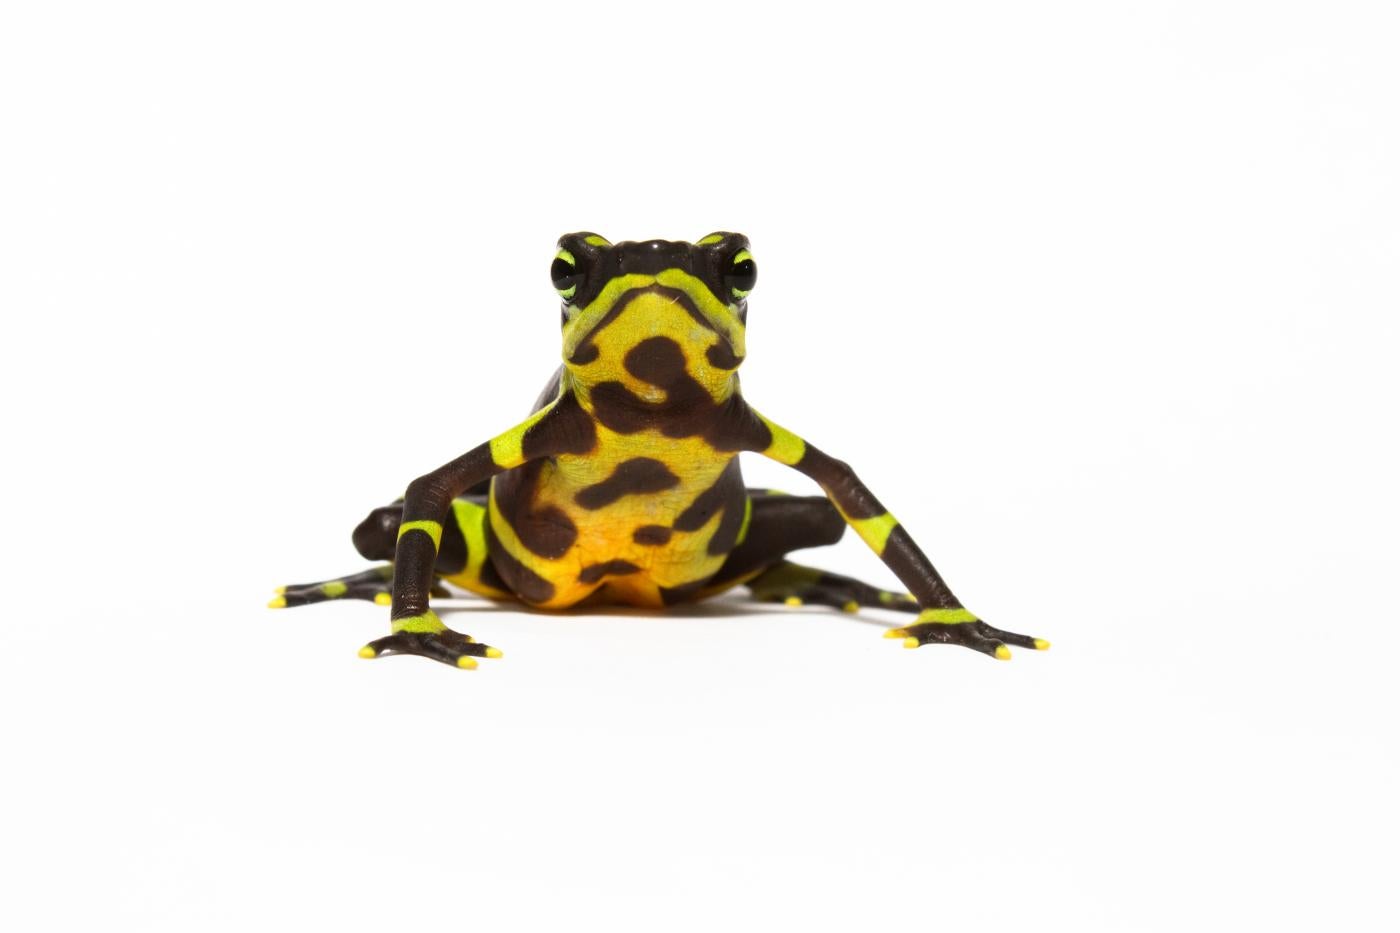 Limosa harlequin frogs (Atelopus limosus), which are native to Panama, are among the species most affected by the chytrid fungus. 